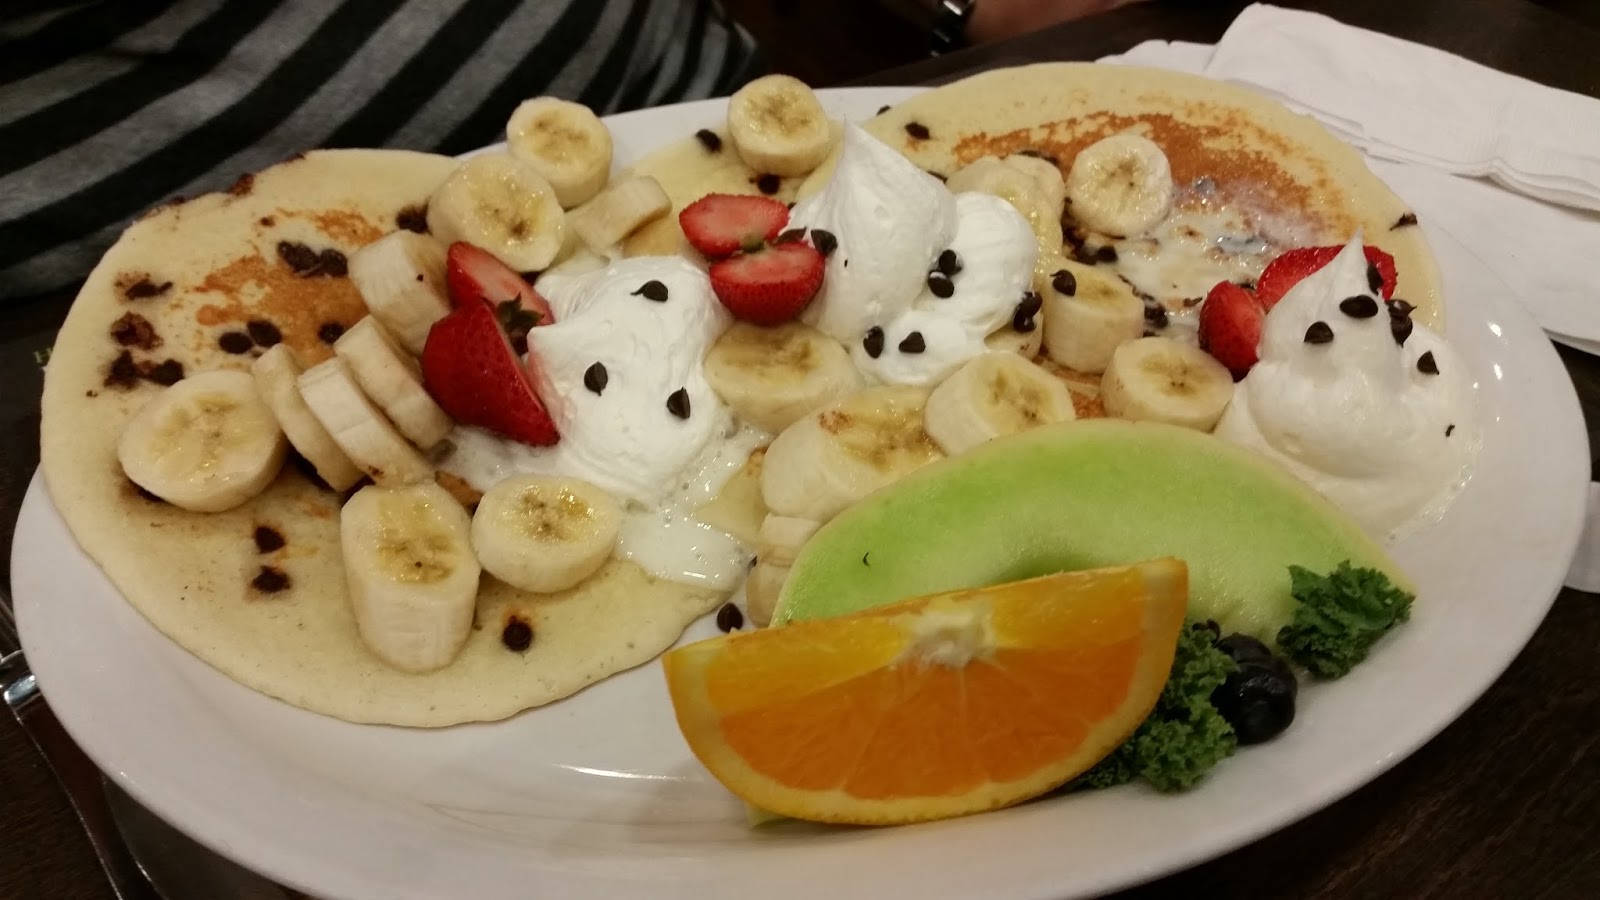 What's gluten free at Tutti Frutti Breakfast and Lunch?